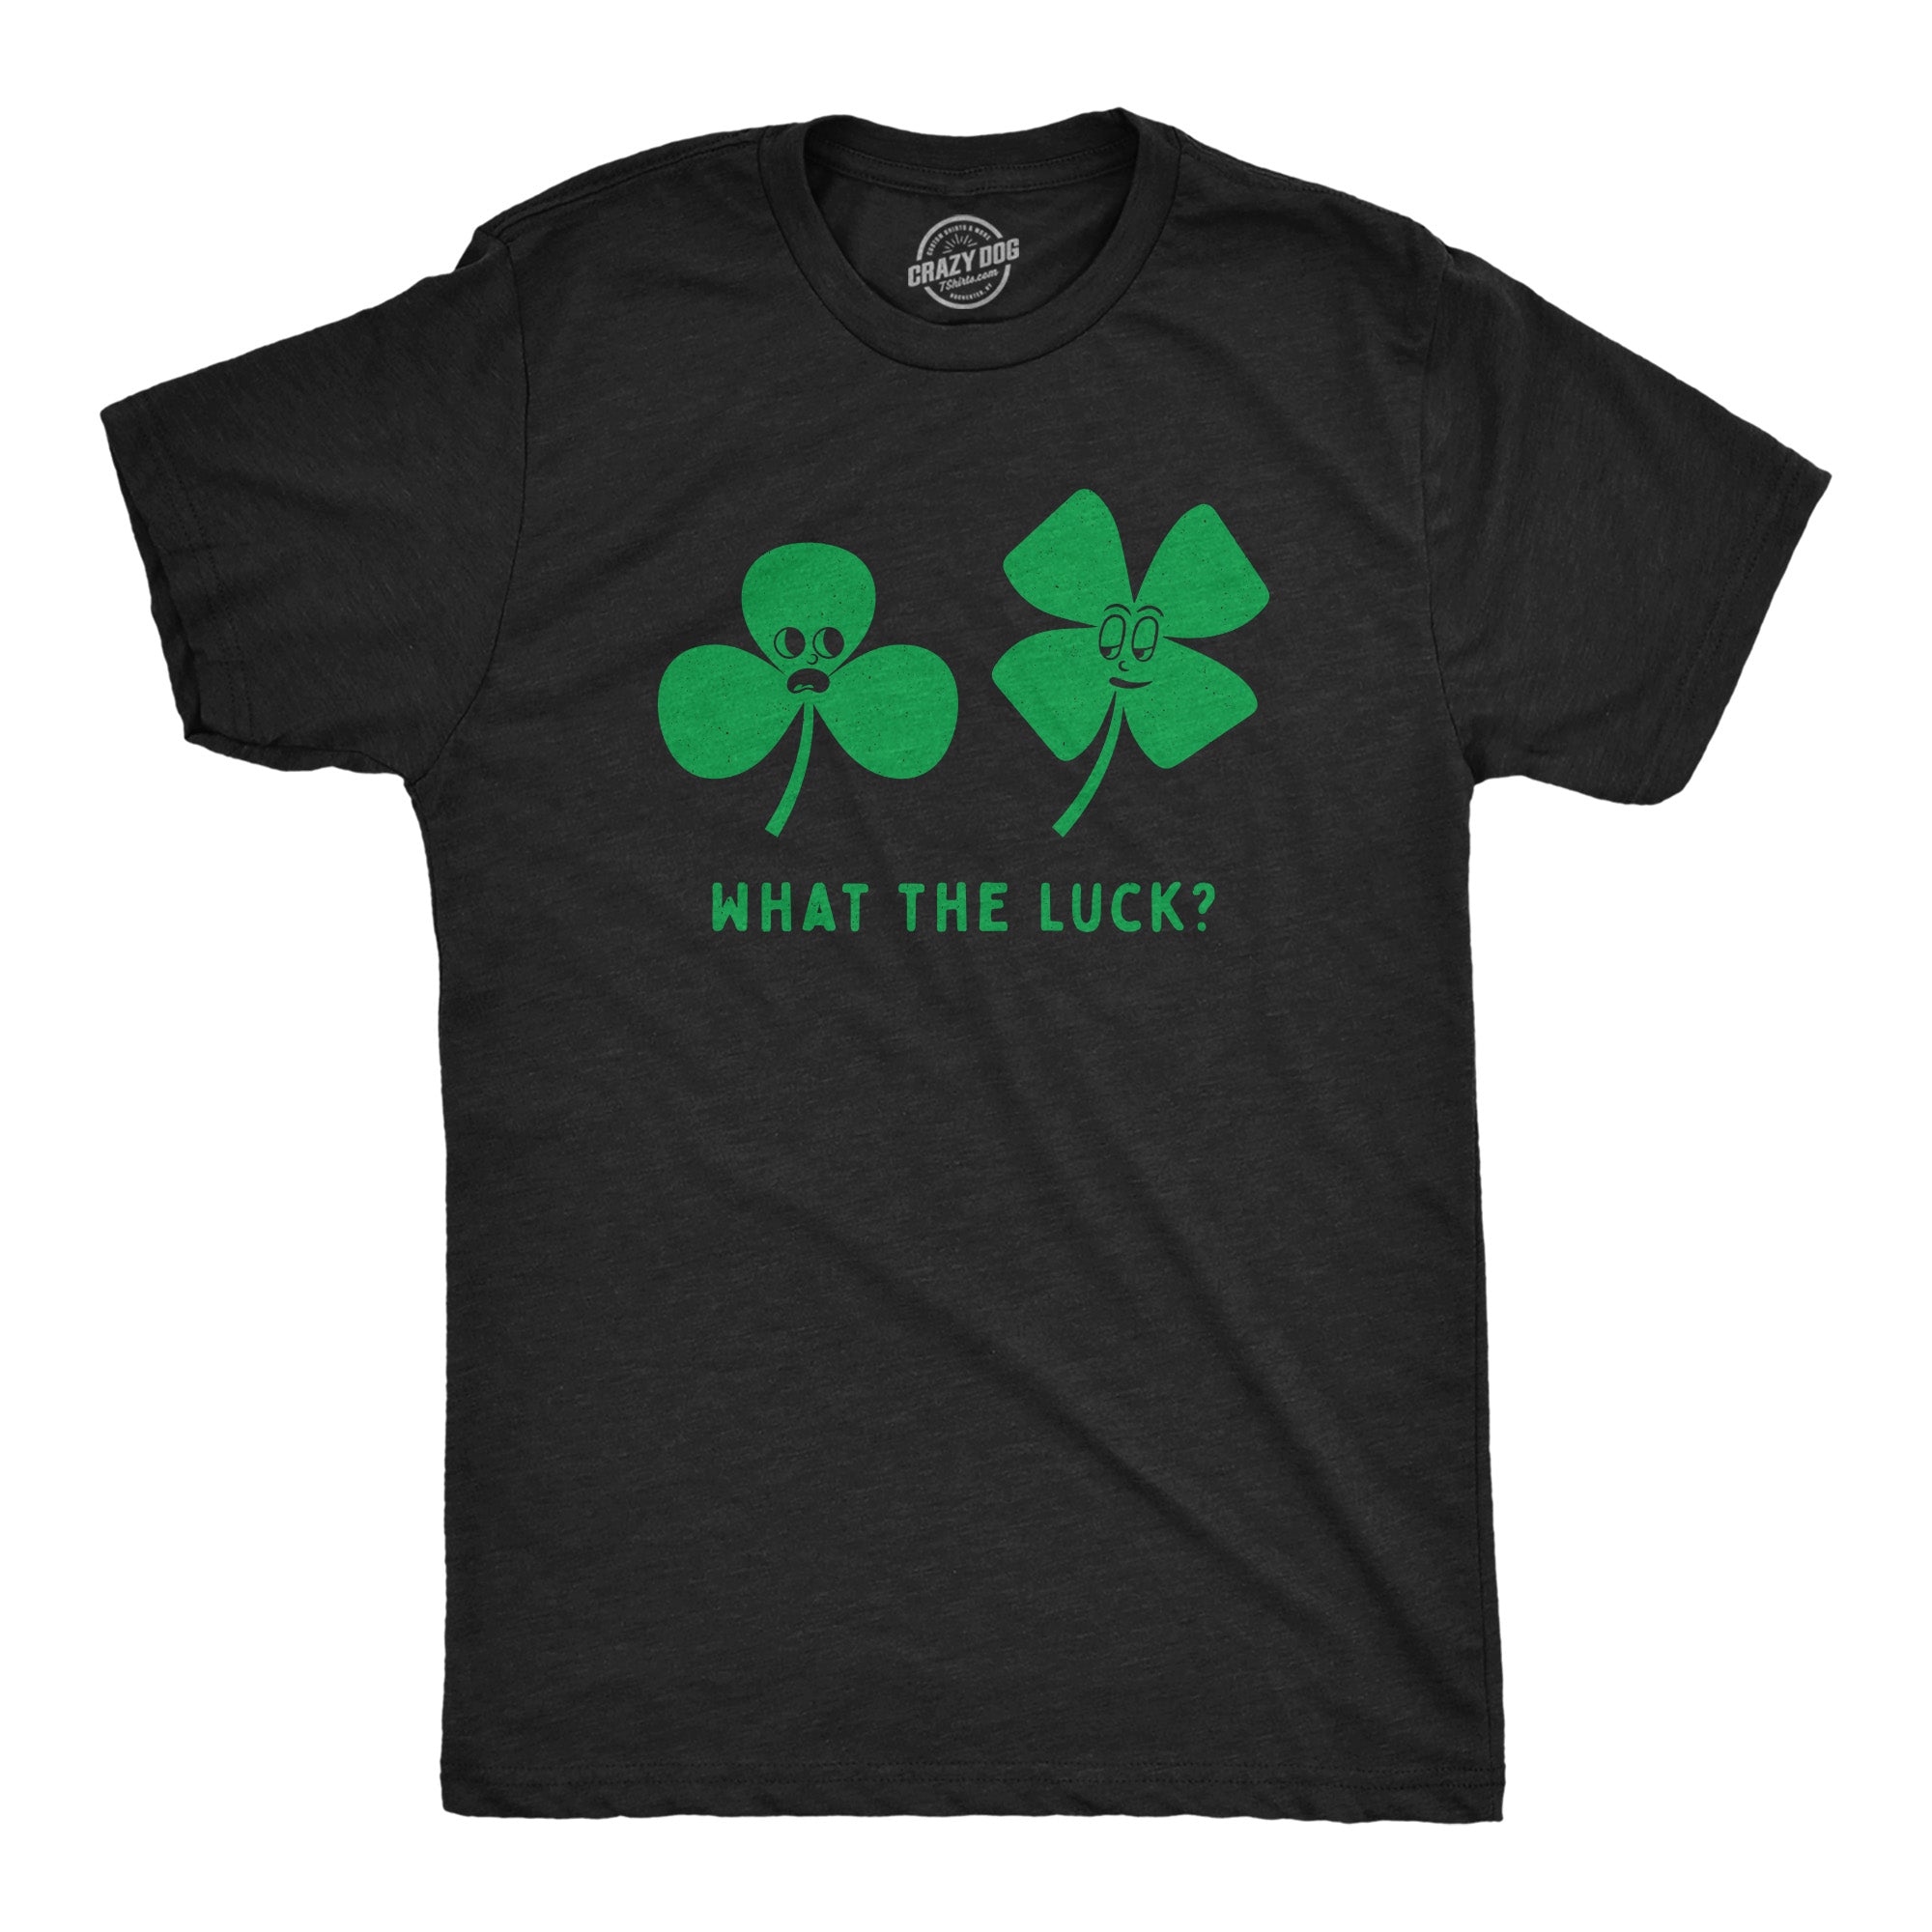 Funny Heather Black - LUCK What The Luck Mens T Shirt Nerdy Saint Patrick's Day Tee